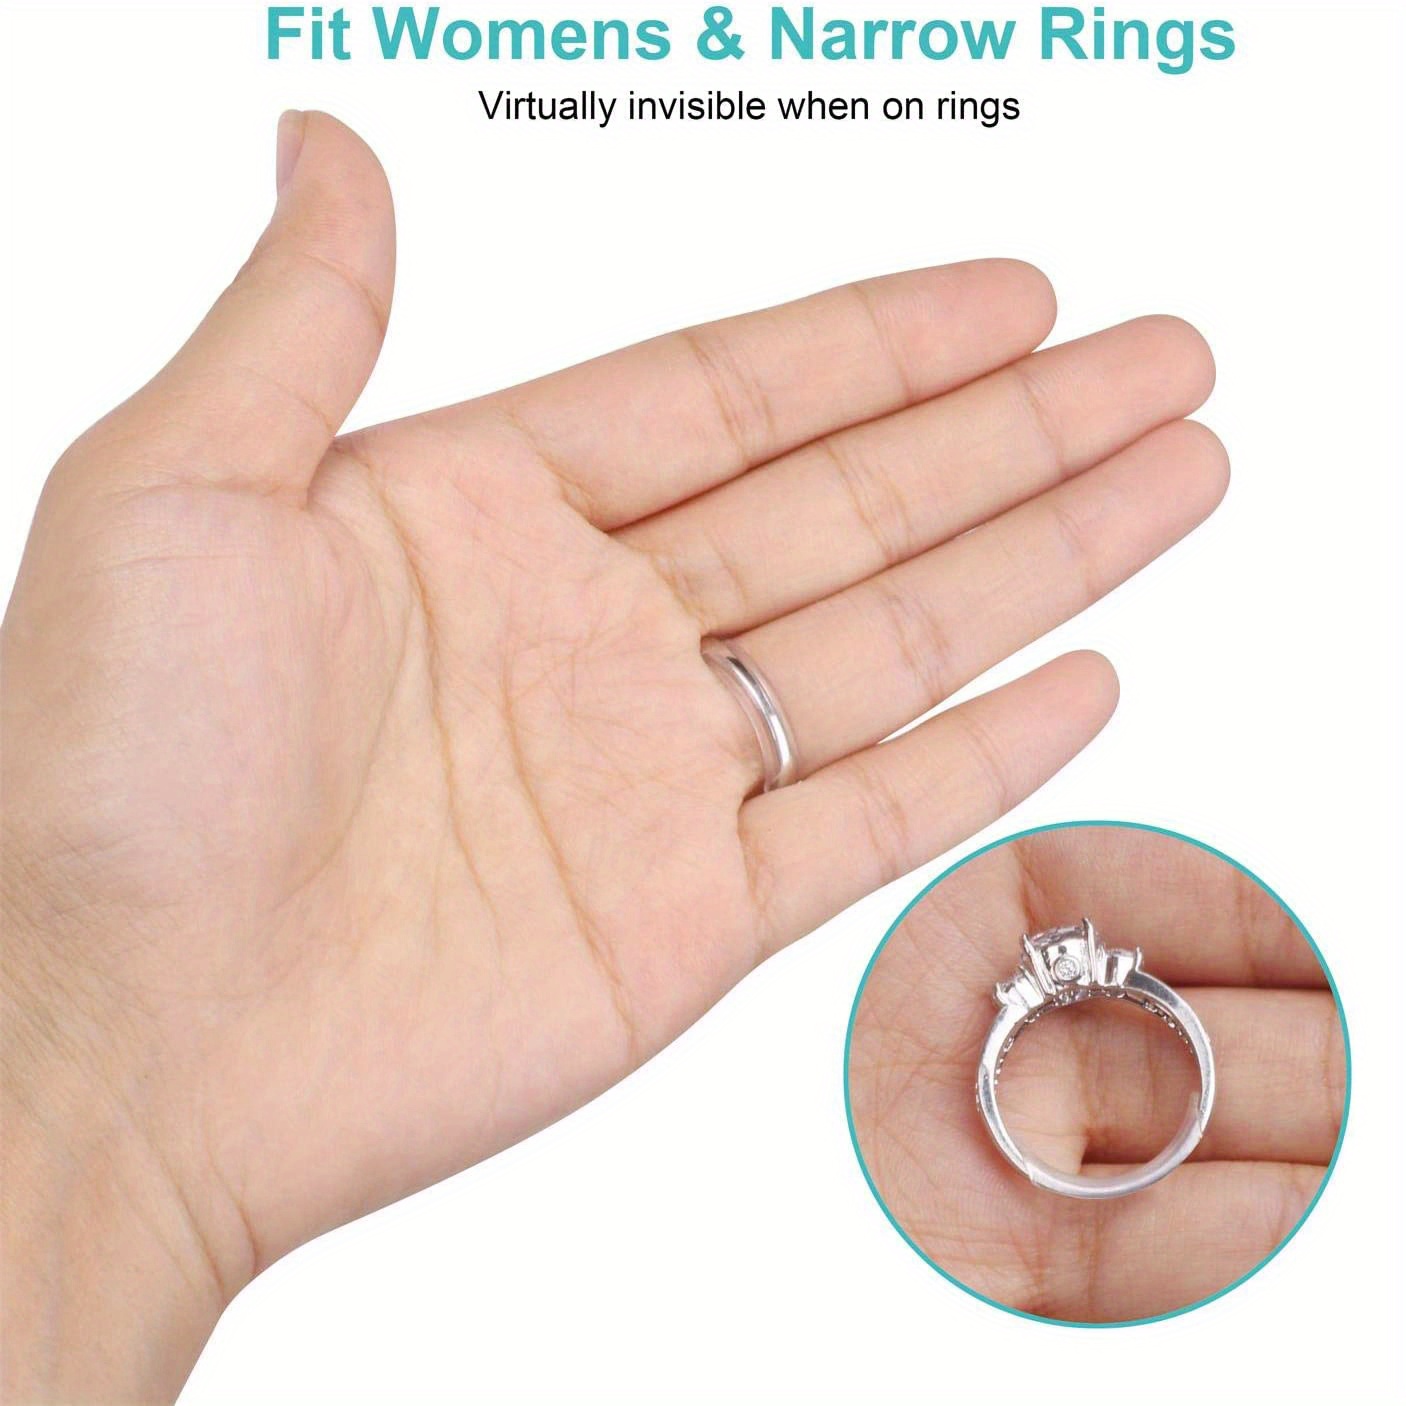 Ring Size Adjuster for Loose Rings - Invisible Silicone Ring Guard Clip  Jewelry Tightener Resizer - Fitter for Women Loose Rings - Fit Almost Any  Ring - 8 Pack, 4 Sizes price in UAE,  UAE